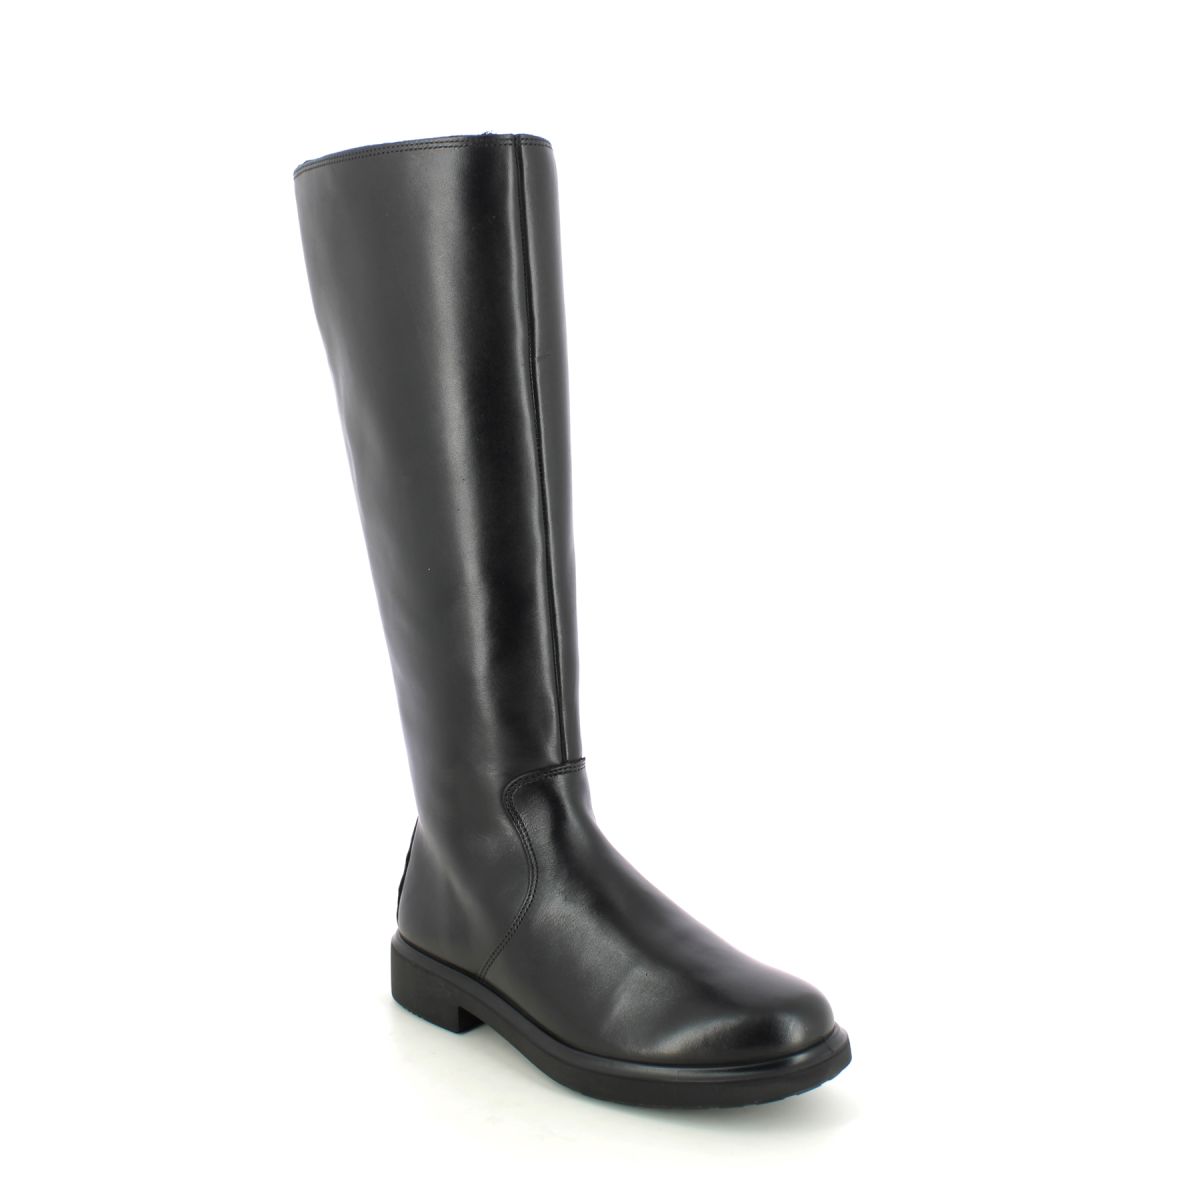 Ecco Amsterdam Metropole Tex Black Leather Womens Knee-High Boots 222023-01001 In Size 38 In Plain Black Leather